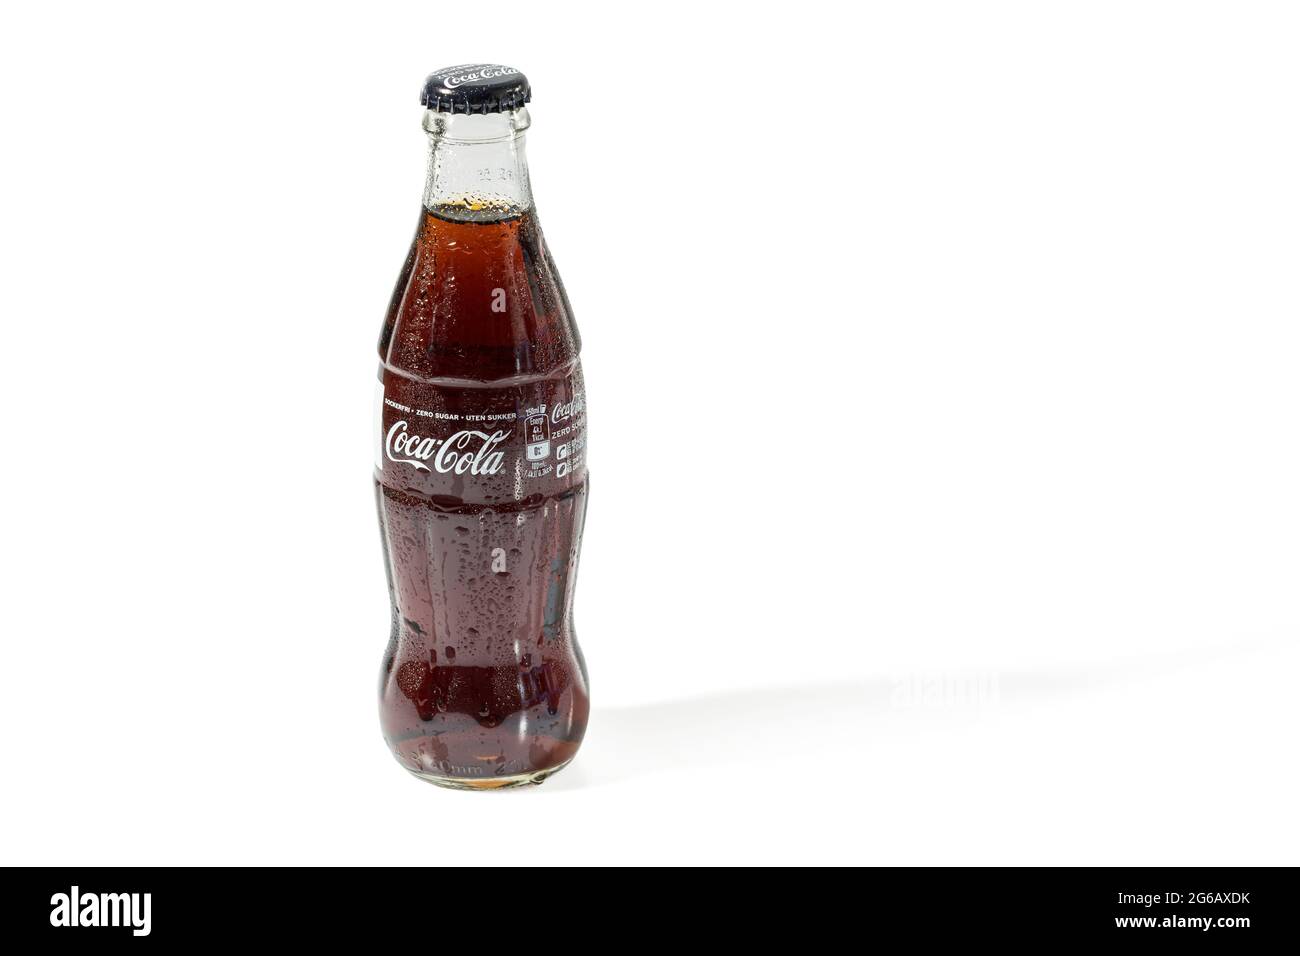 https://c8.alamy.com/comp/2G6AXDK/close-up-view-of-coca-cola-in-a-glass-bottle-isolated-on-white-background-2G6AXDK.jpg